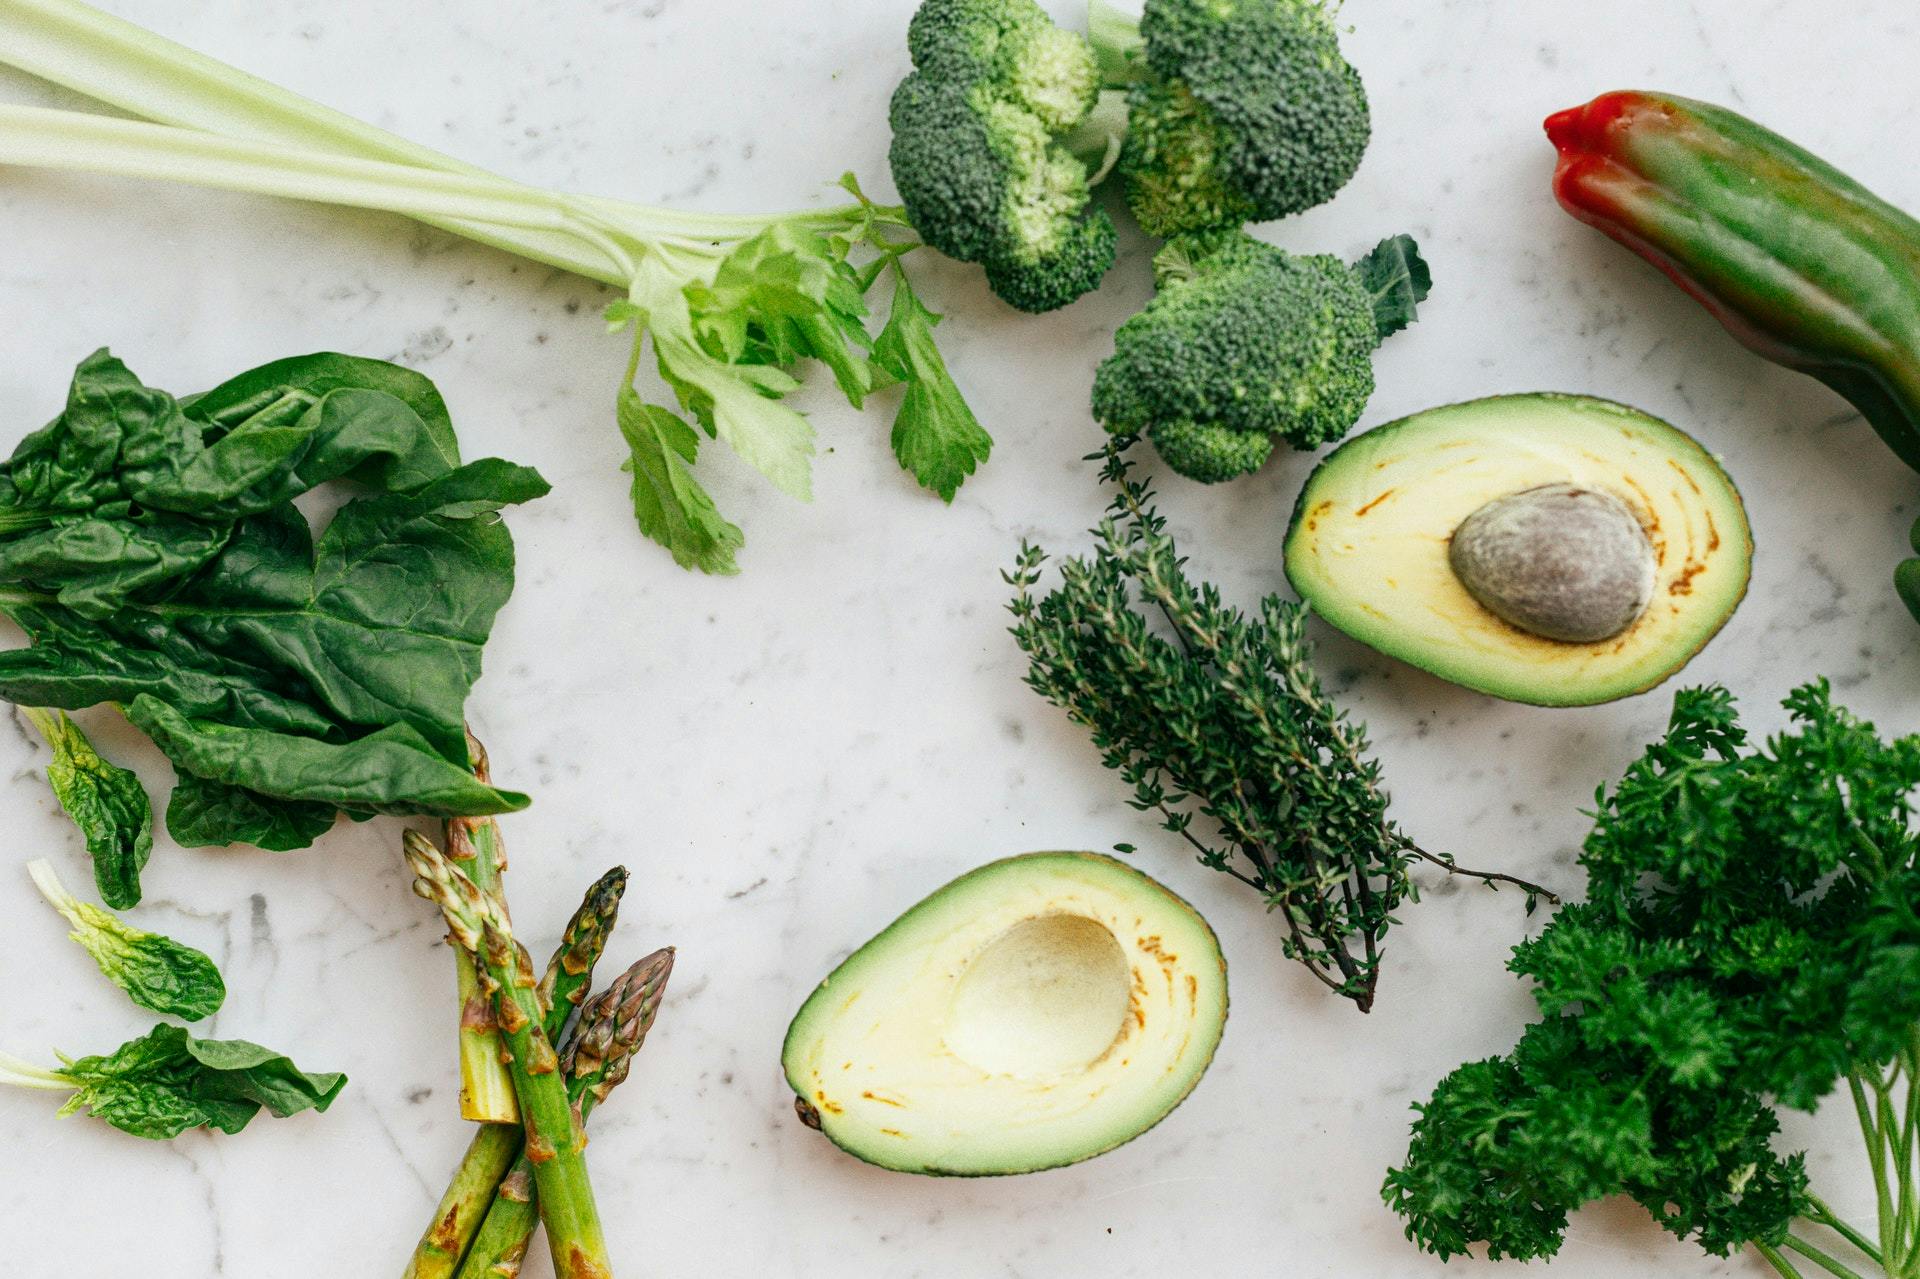 Food sources of folate (vitamin B9) — spinach, avocado, and broccoli 